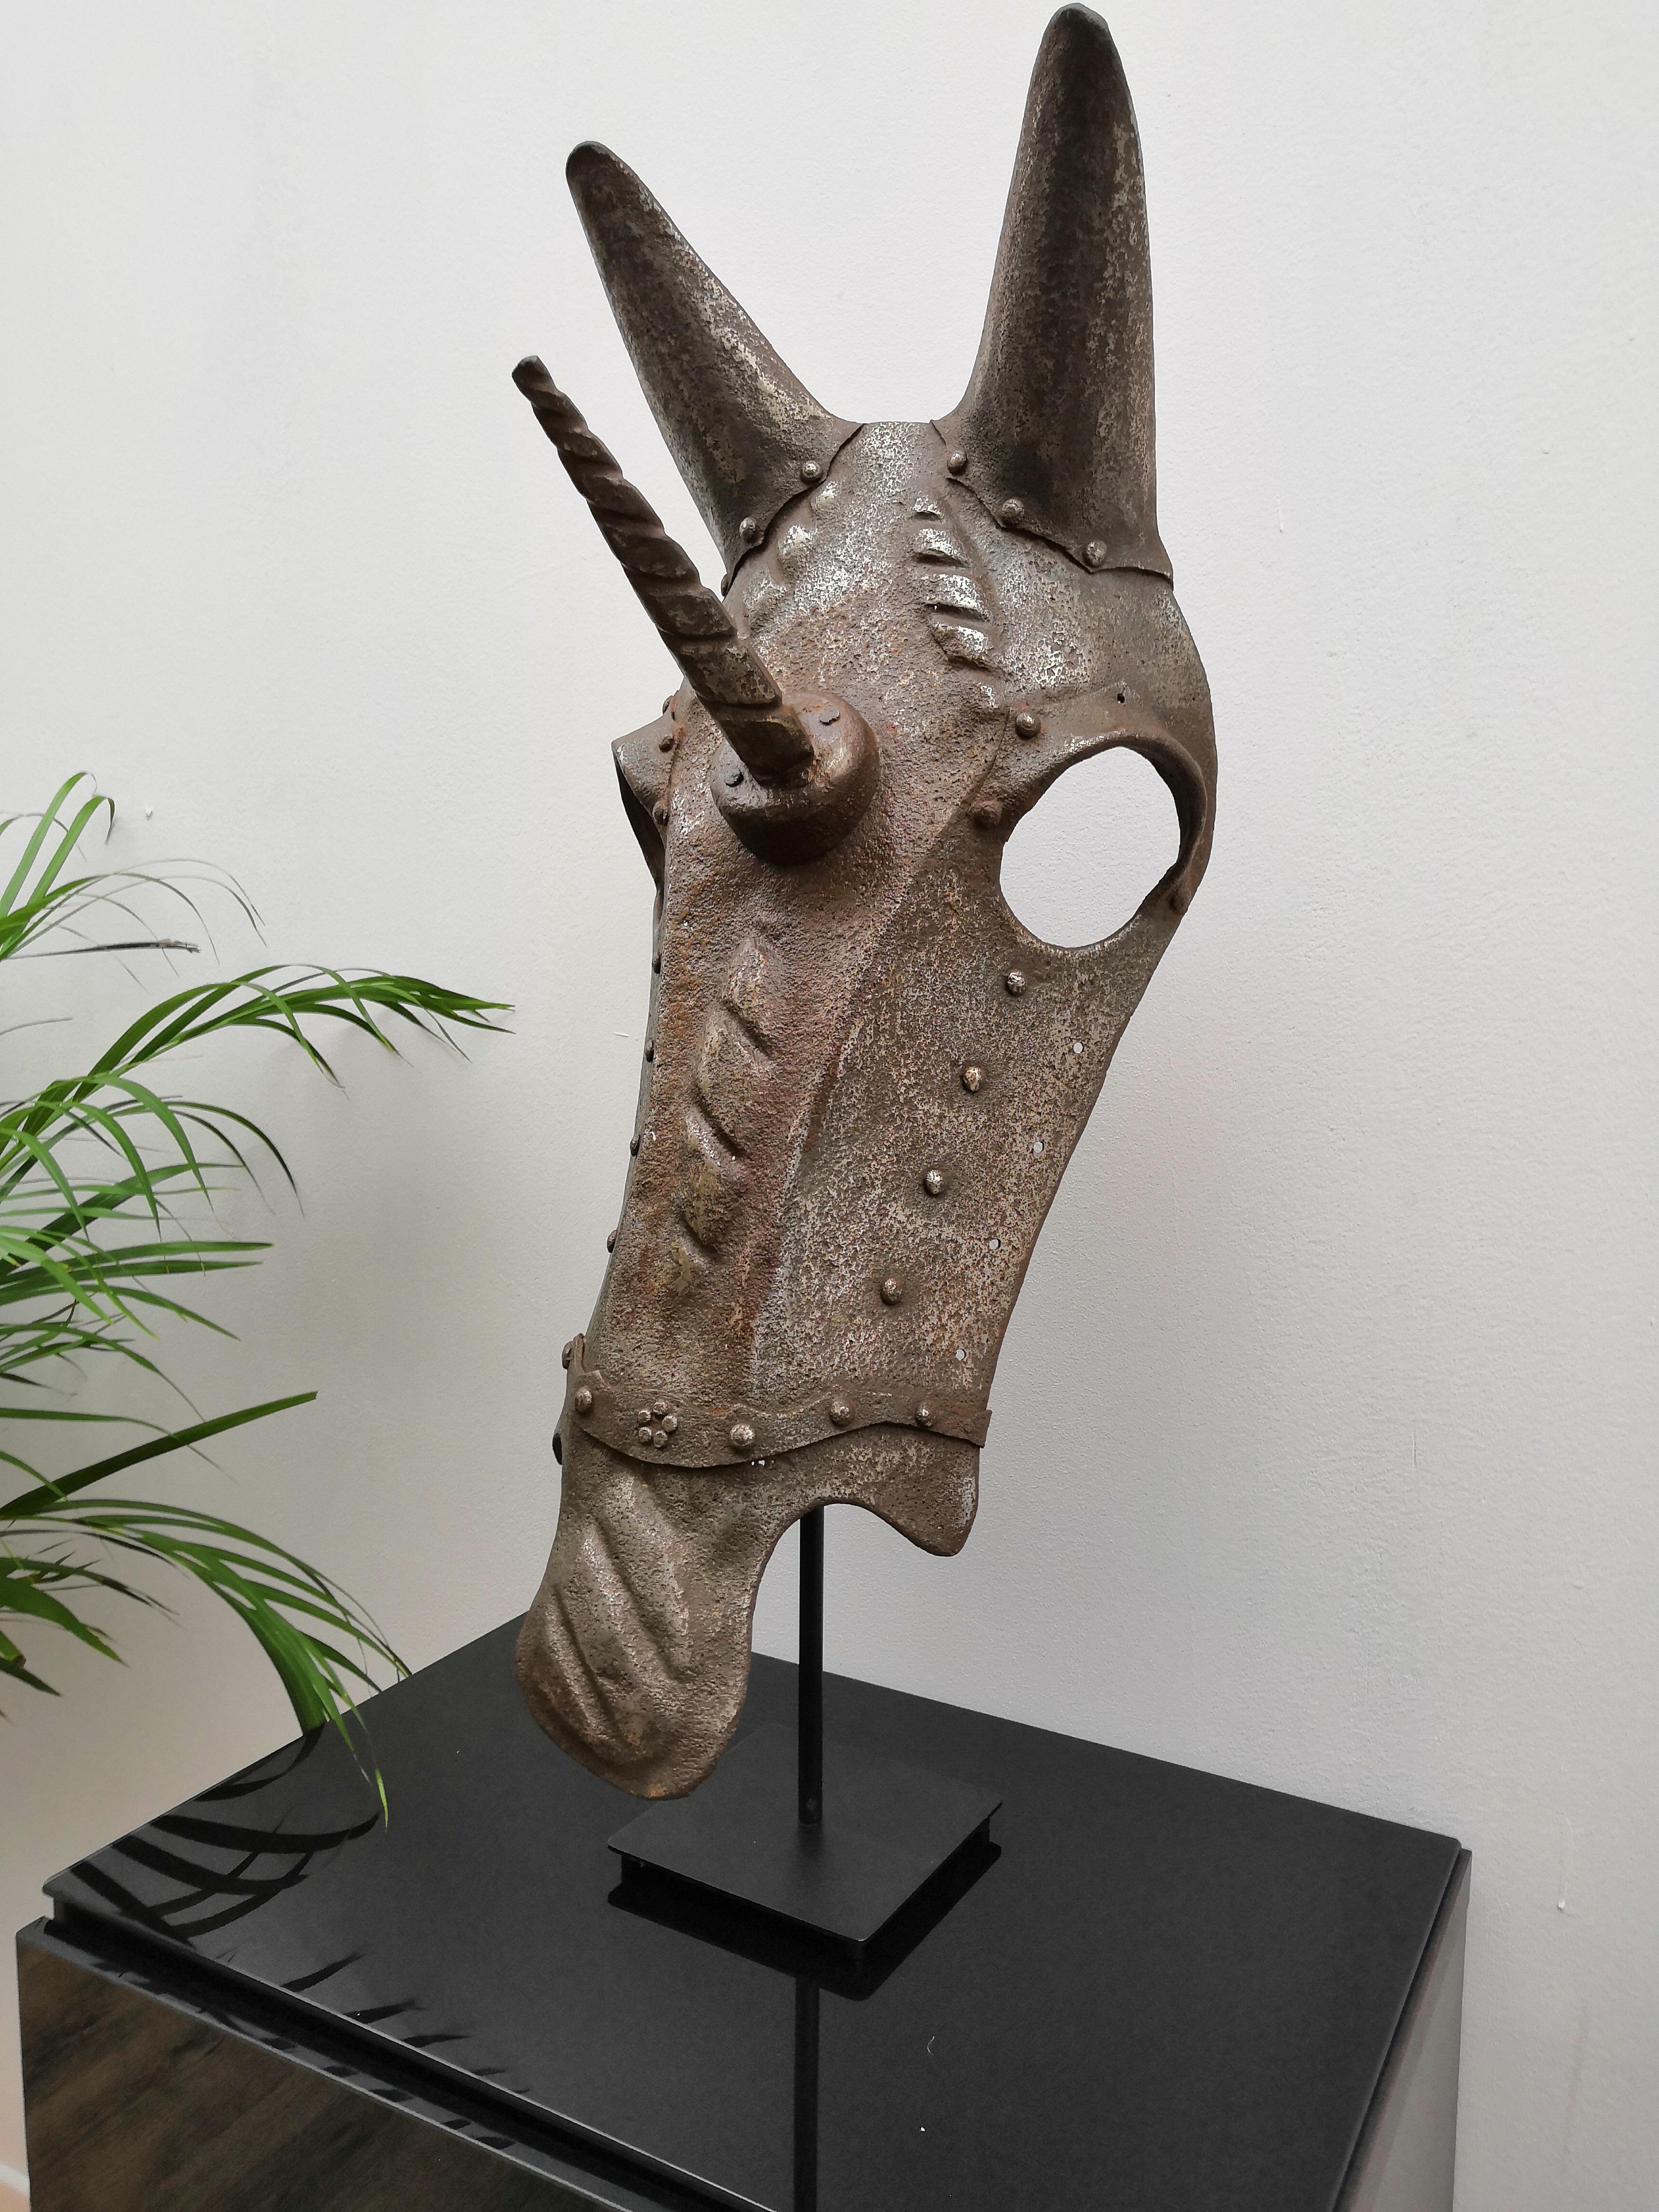 Authentic chanfron or horse armour face mask, dated circa late 18th-early mid-19th century from Northern Italy in wrought iron. 

During the late Middle Ages as armour protection for knights became more effective, their mounts became targets so